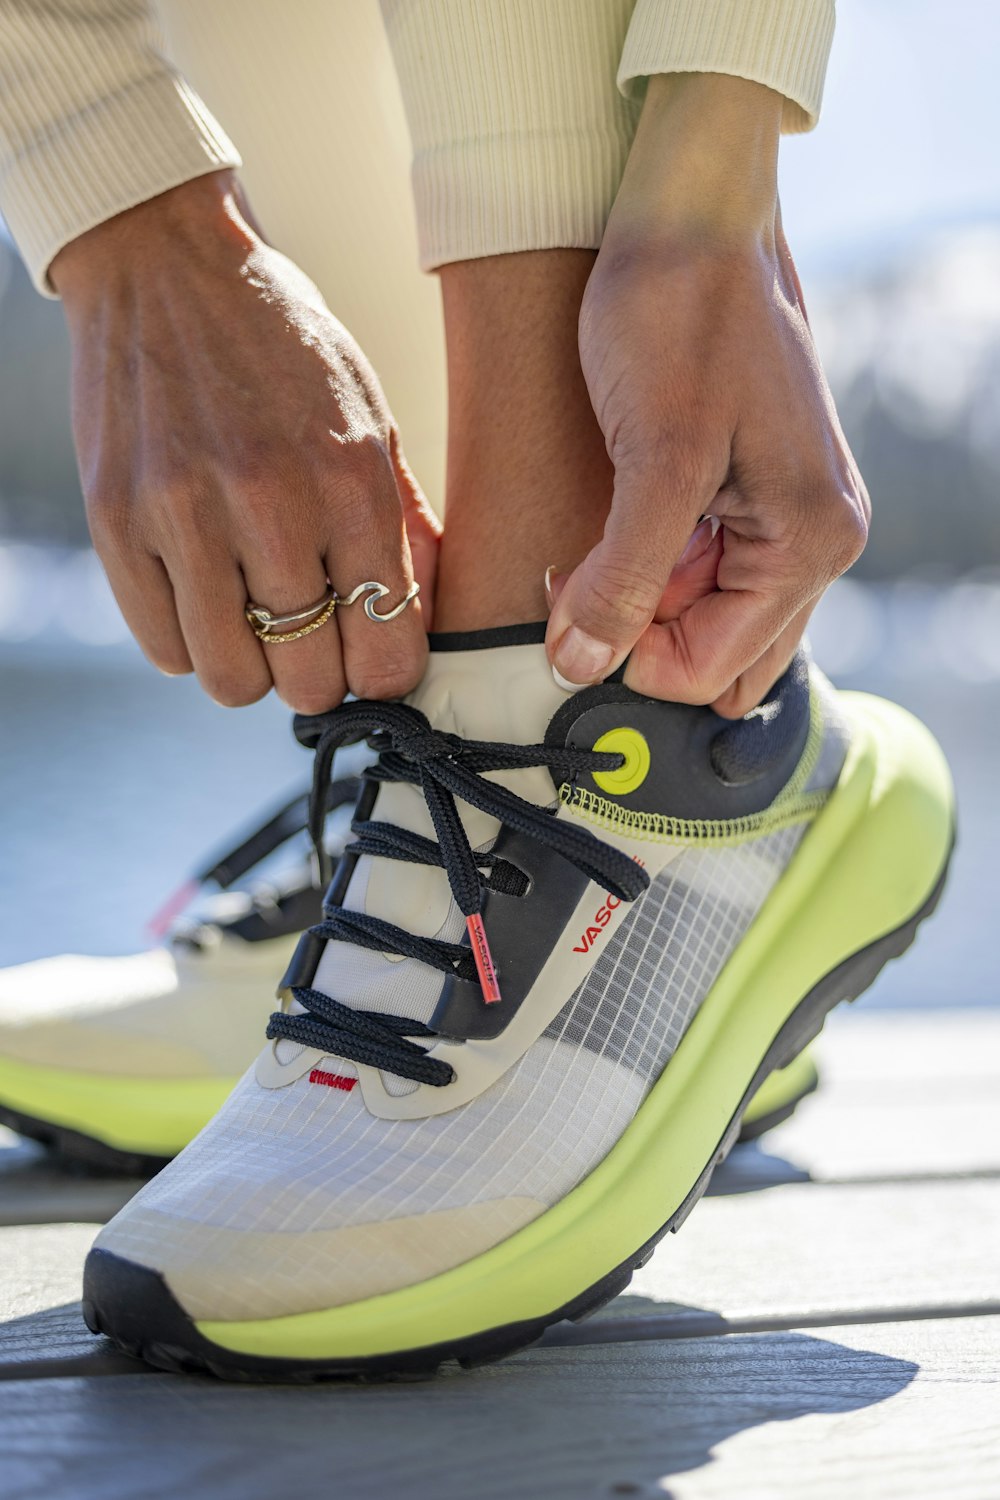 a person tying a shoelace on a tennis shoe